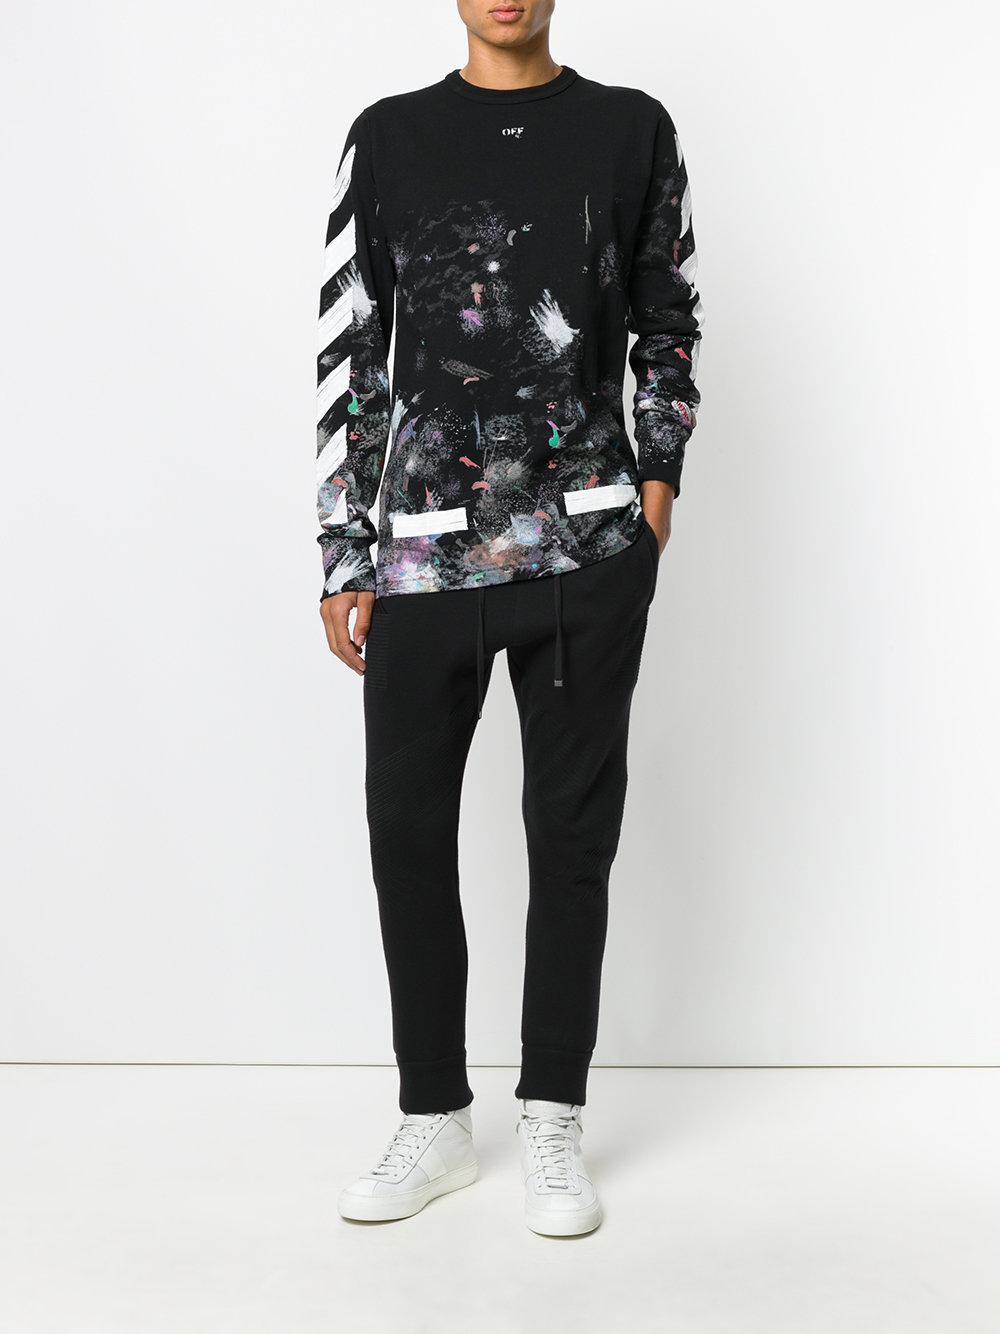 Off-White c/o Virgil Abloh Cotton Galaxy Brushed Long Sleeved T-shirt in  Black for Men - Lyst